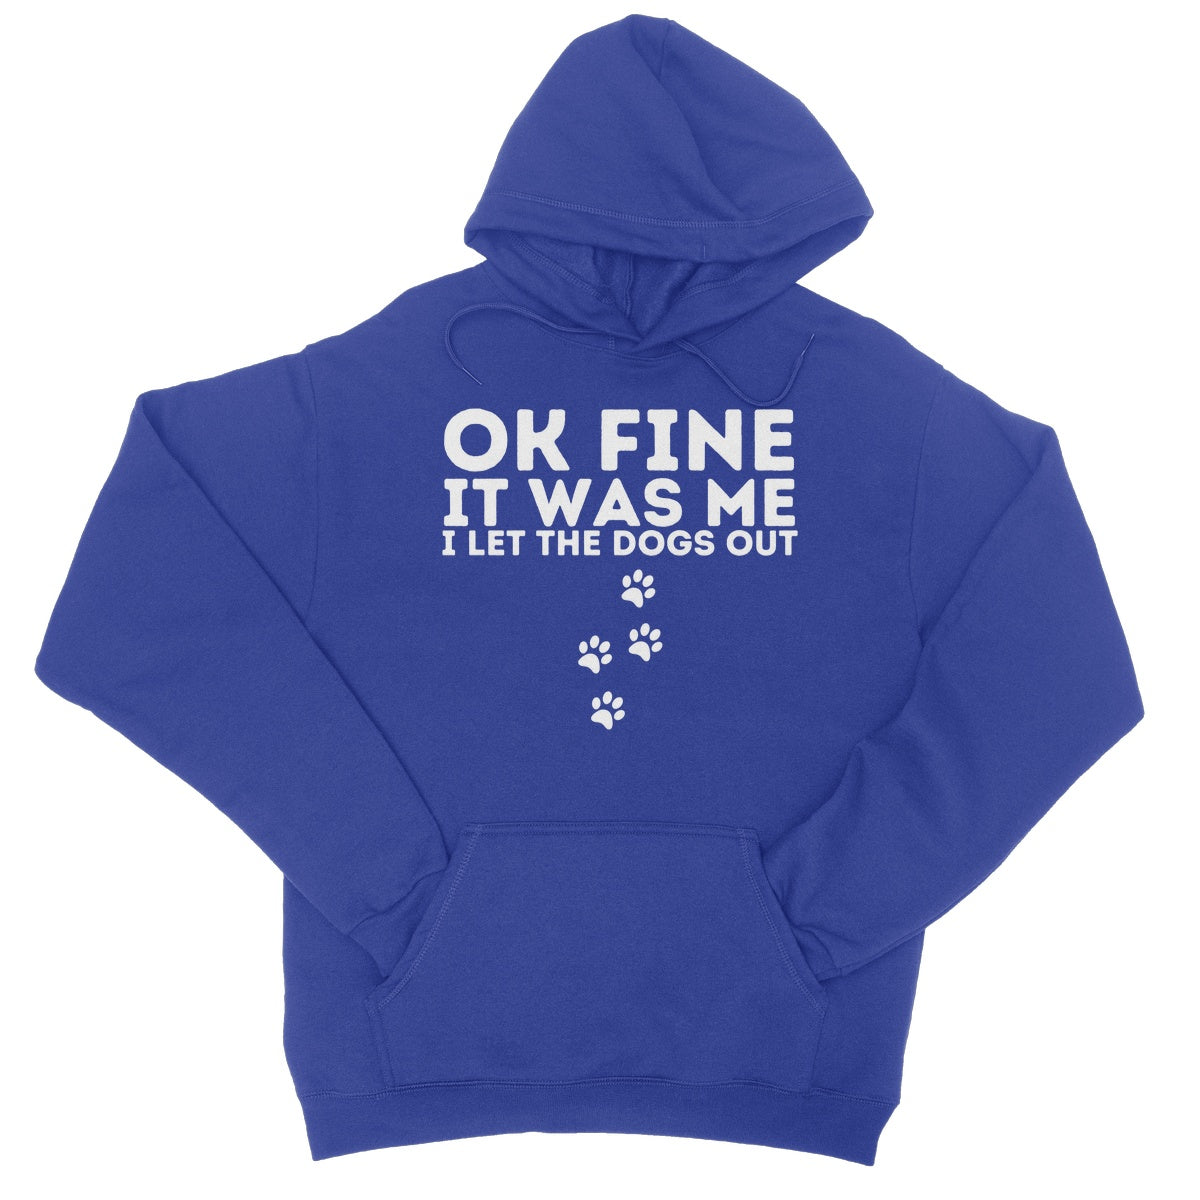 I let the dogs out hoodie blue